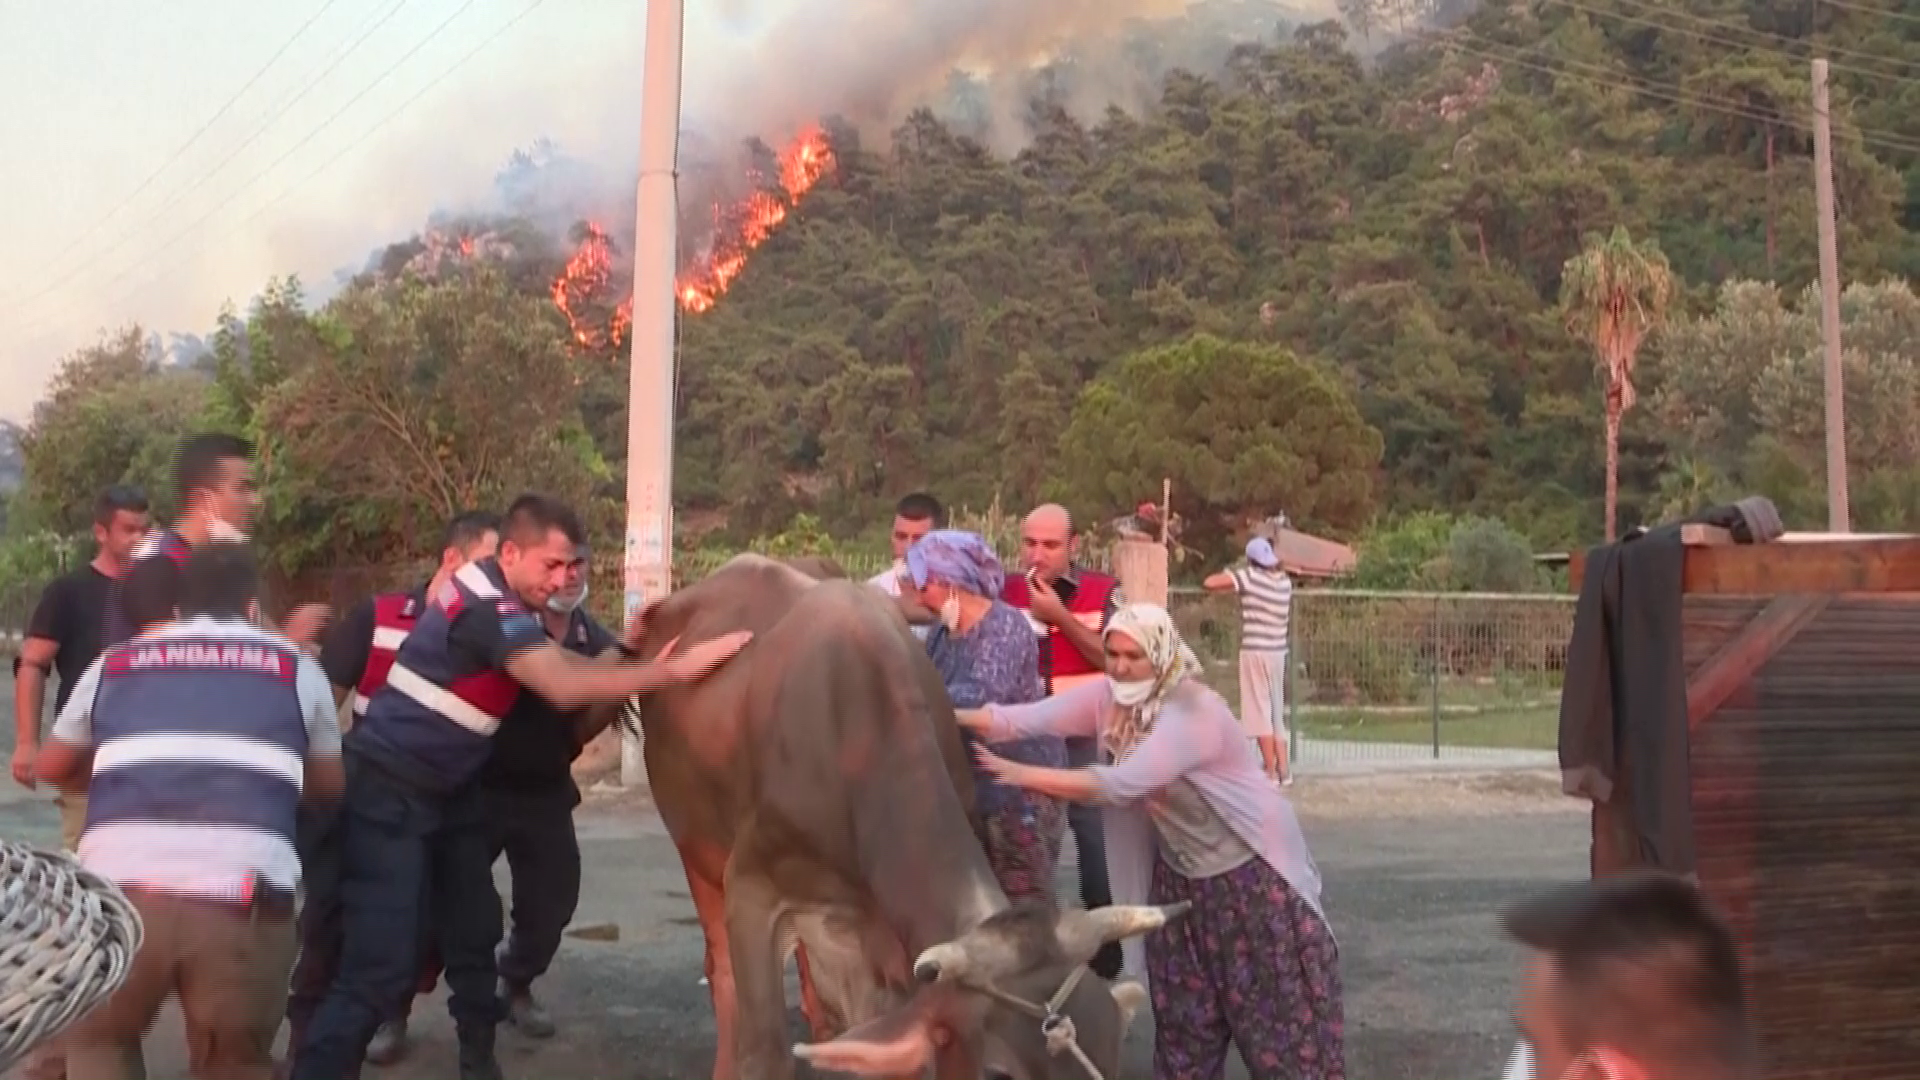 Turkish farmers shelter their cattle on a beach as wildfires rage